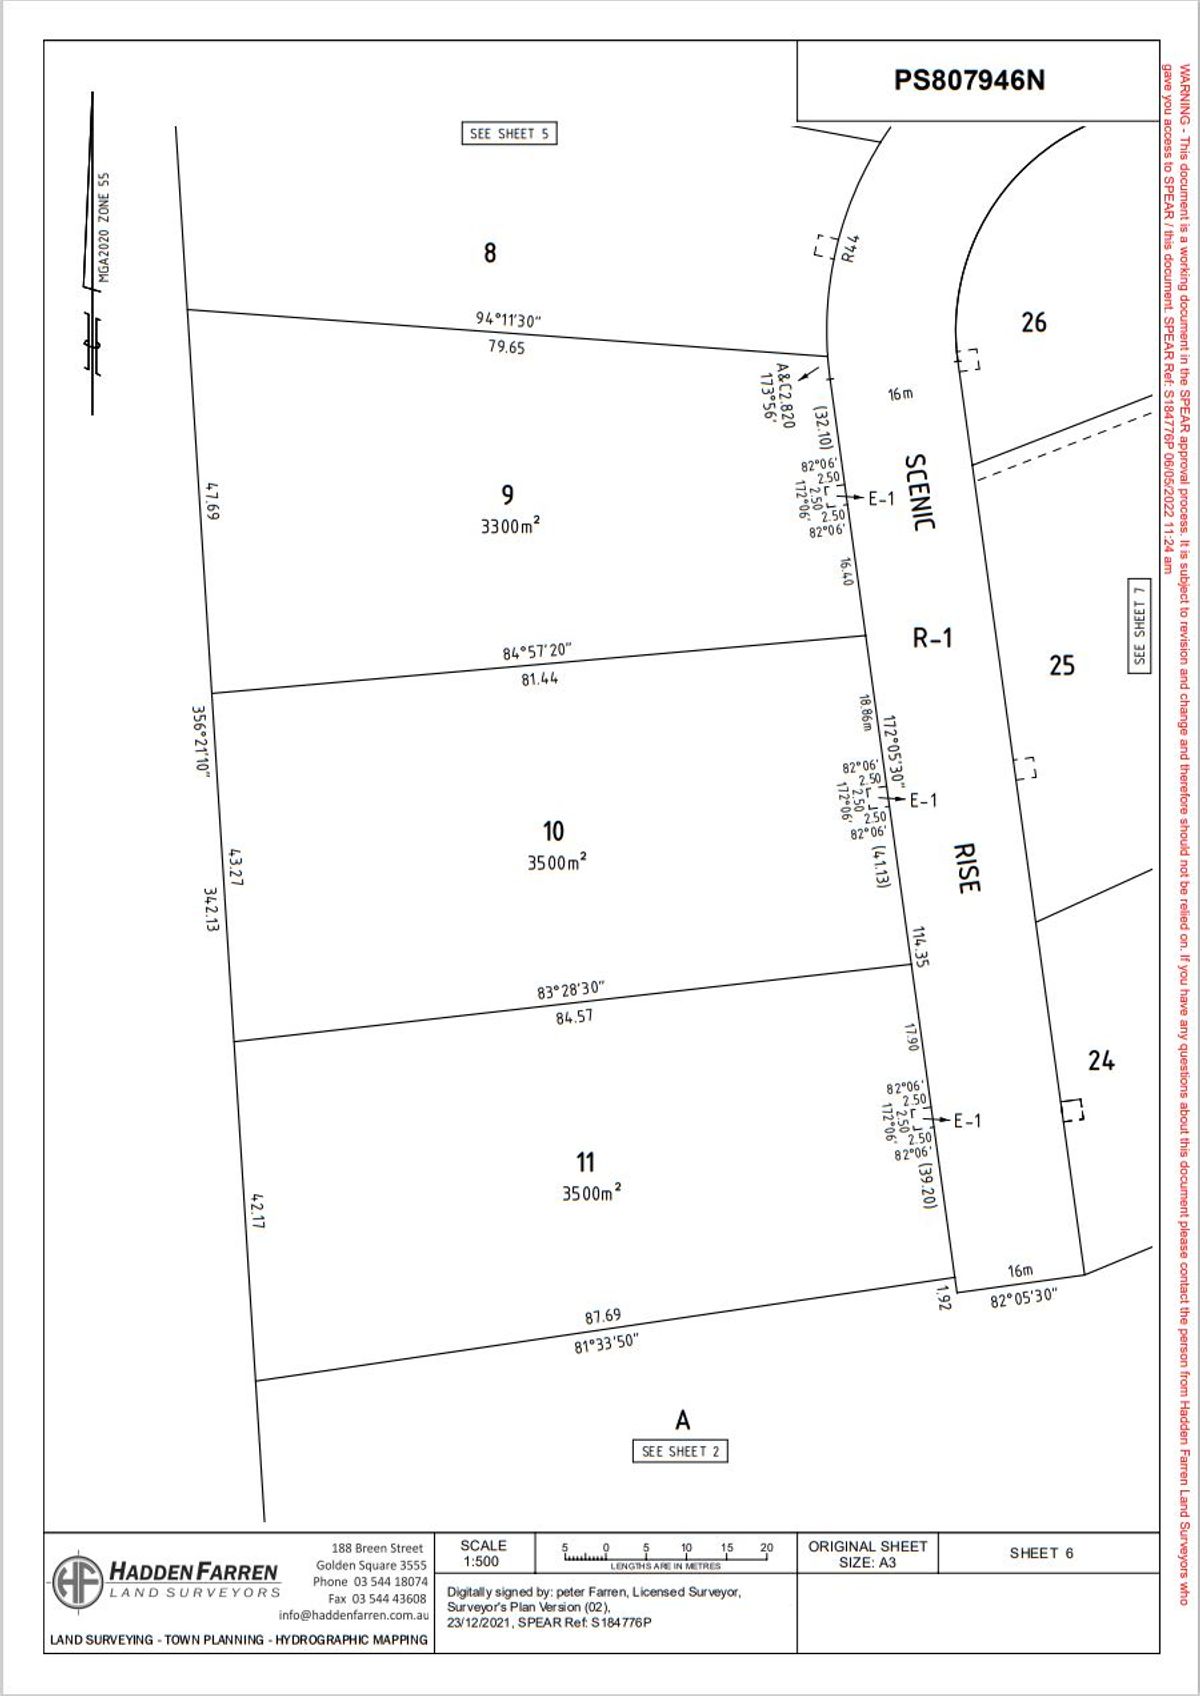 Page 6 Plan of subdivision